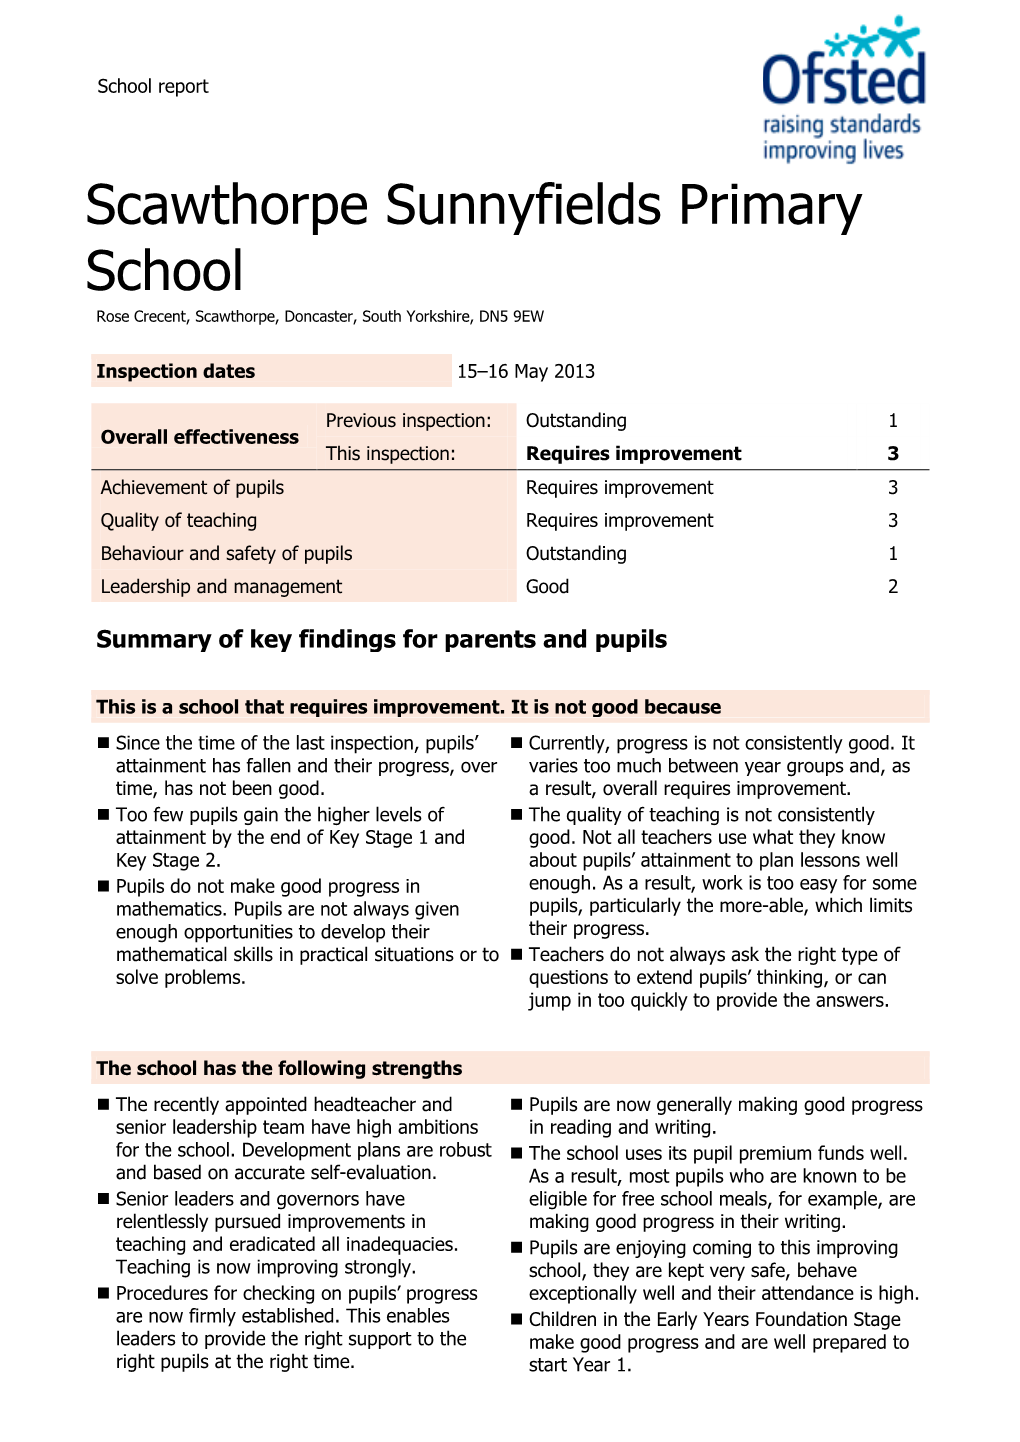 Scawthorpe Sunnyfields Primary School Rose Crecent, Scawthorpe, Doncaster, South Yorkshire, DN5 9EW